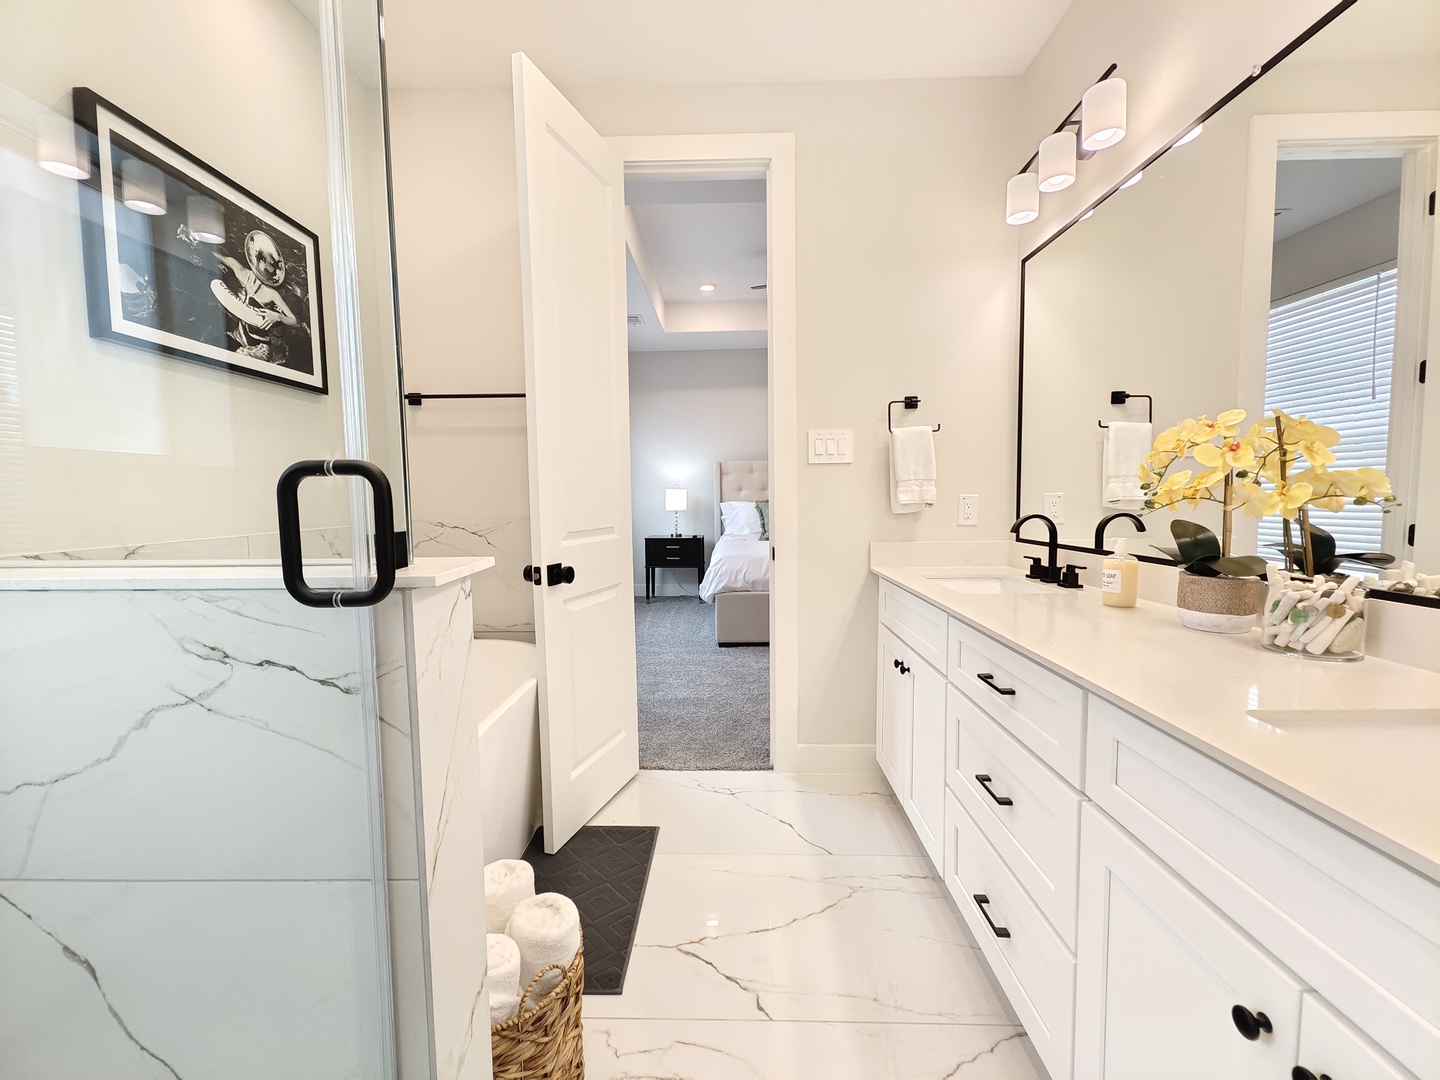 The master ensuite features a double vanity, glass shower, & soaking tub